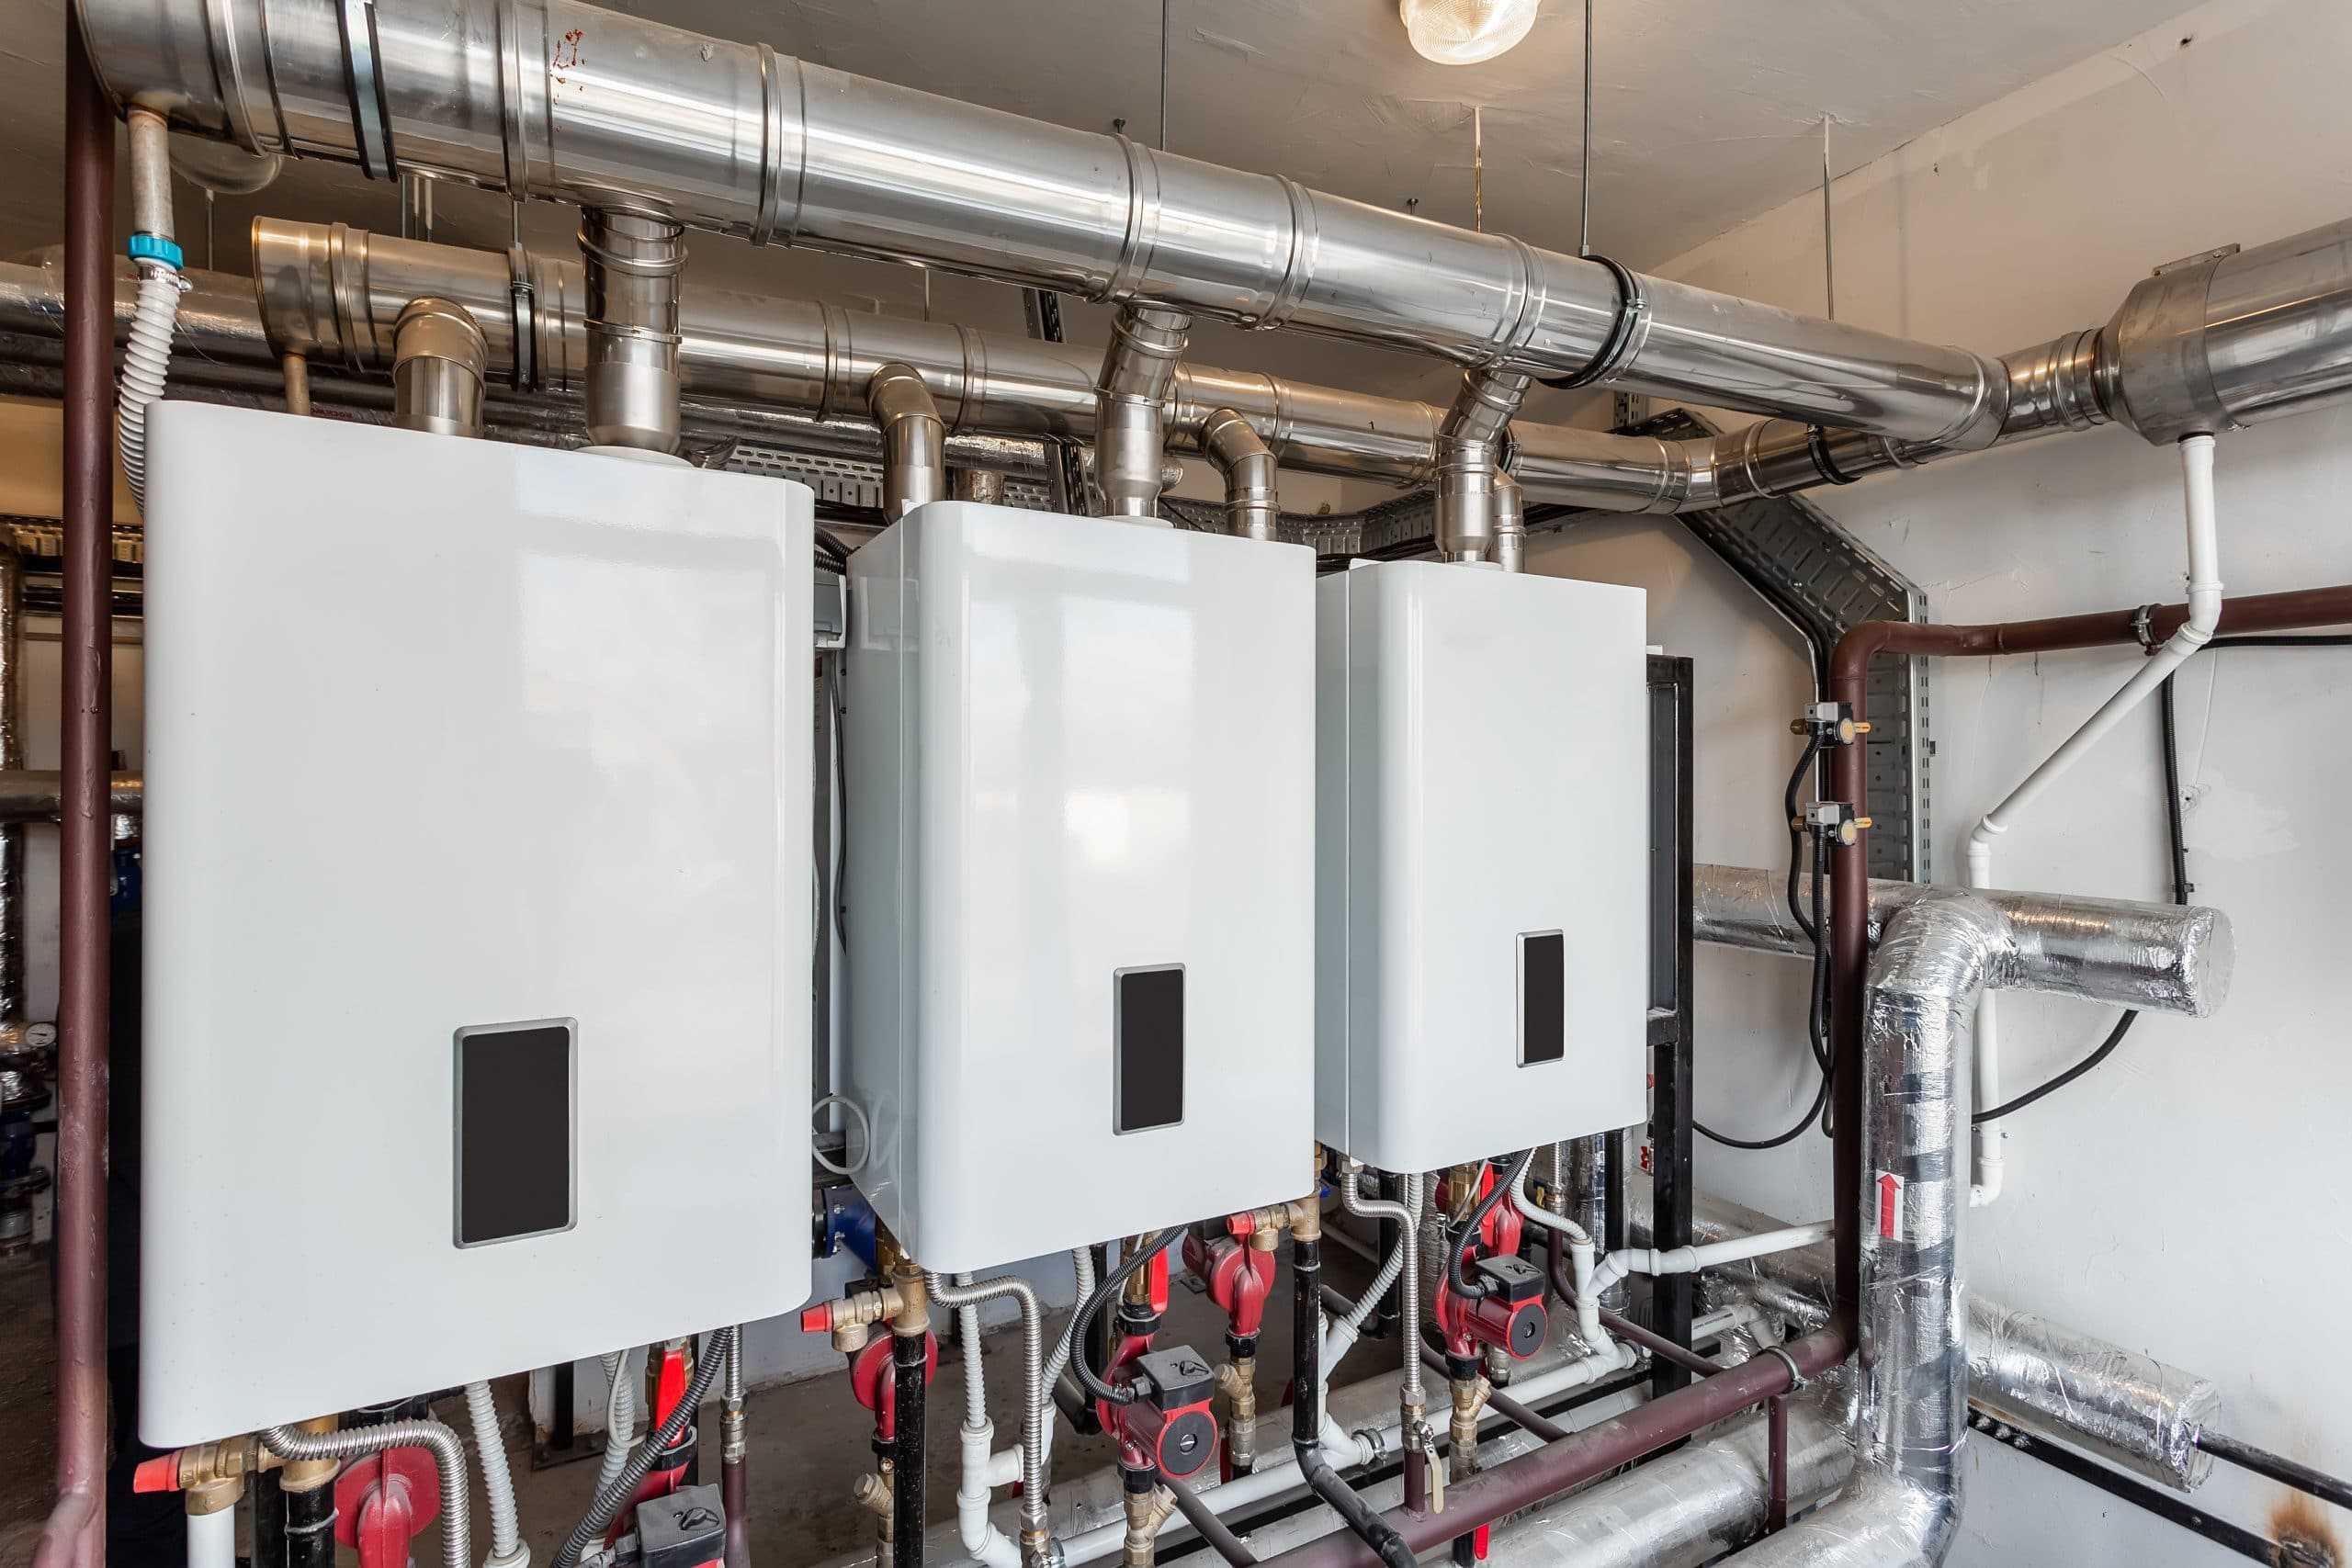 Product Commercial Boiler Services in London | Serviceteam.co.uk image